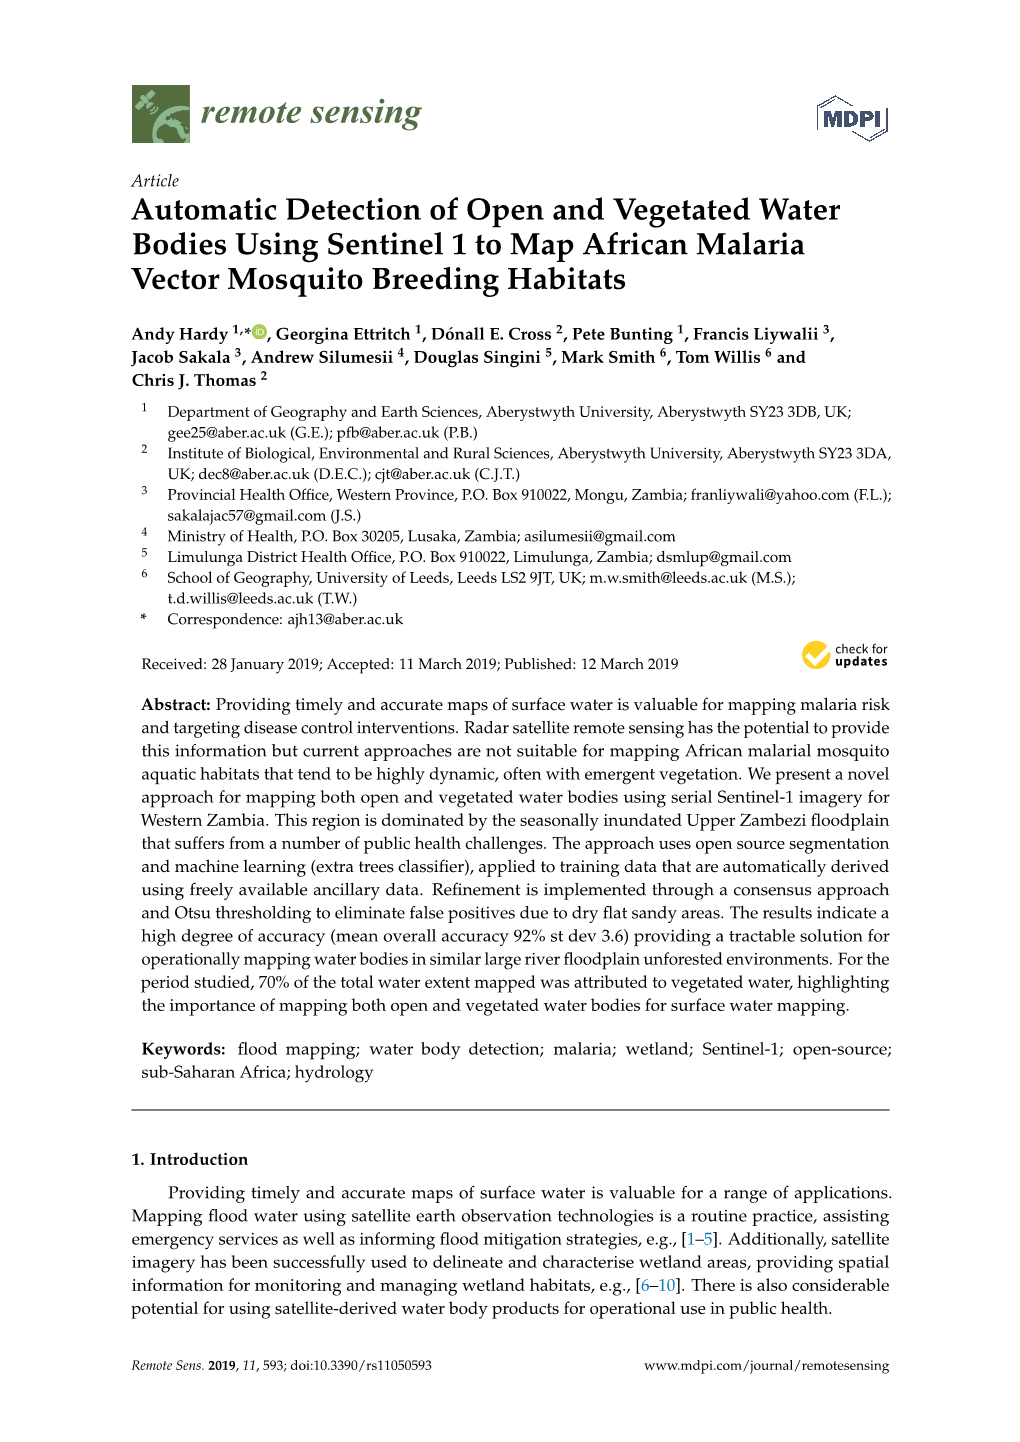 Automatic Detection of Open and Vegetated Water Bodies Using Sentinel 1 to Map African Malaria Vector Mosquito Breeding Habitats